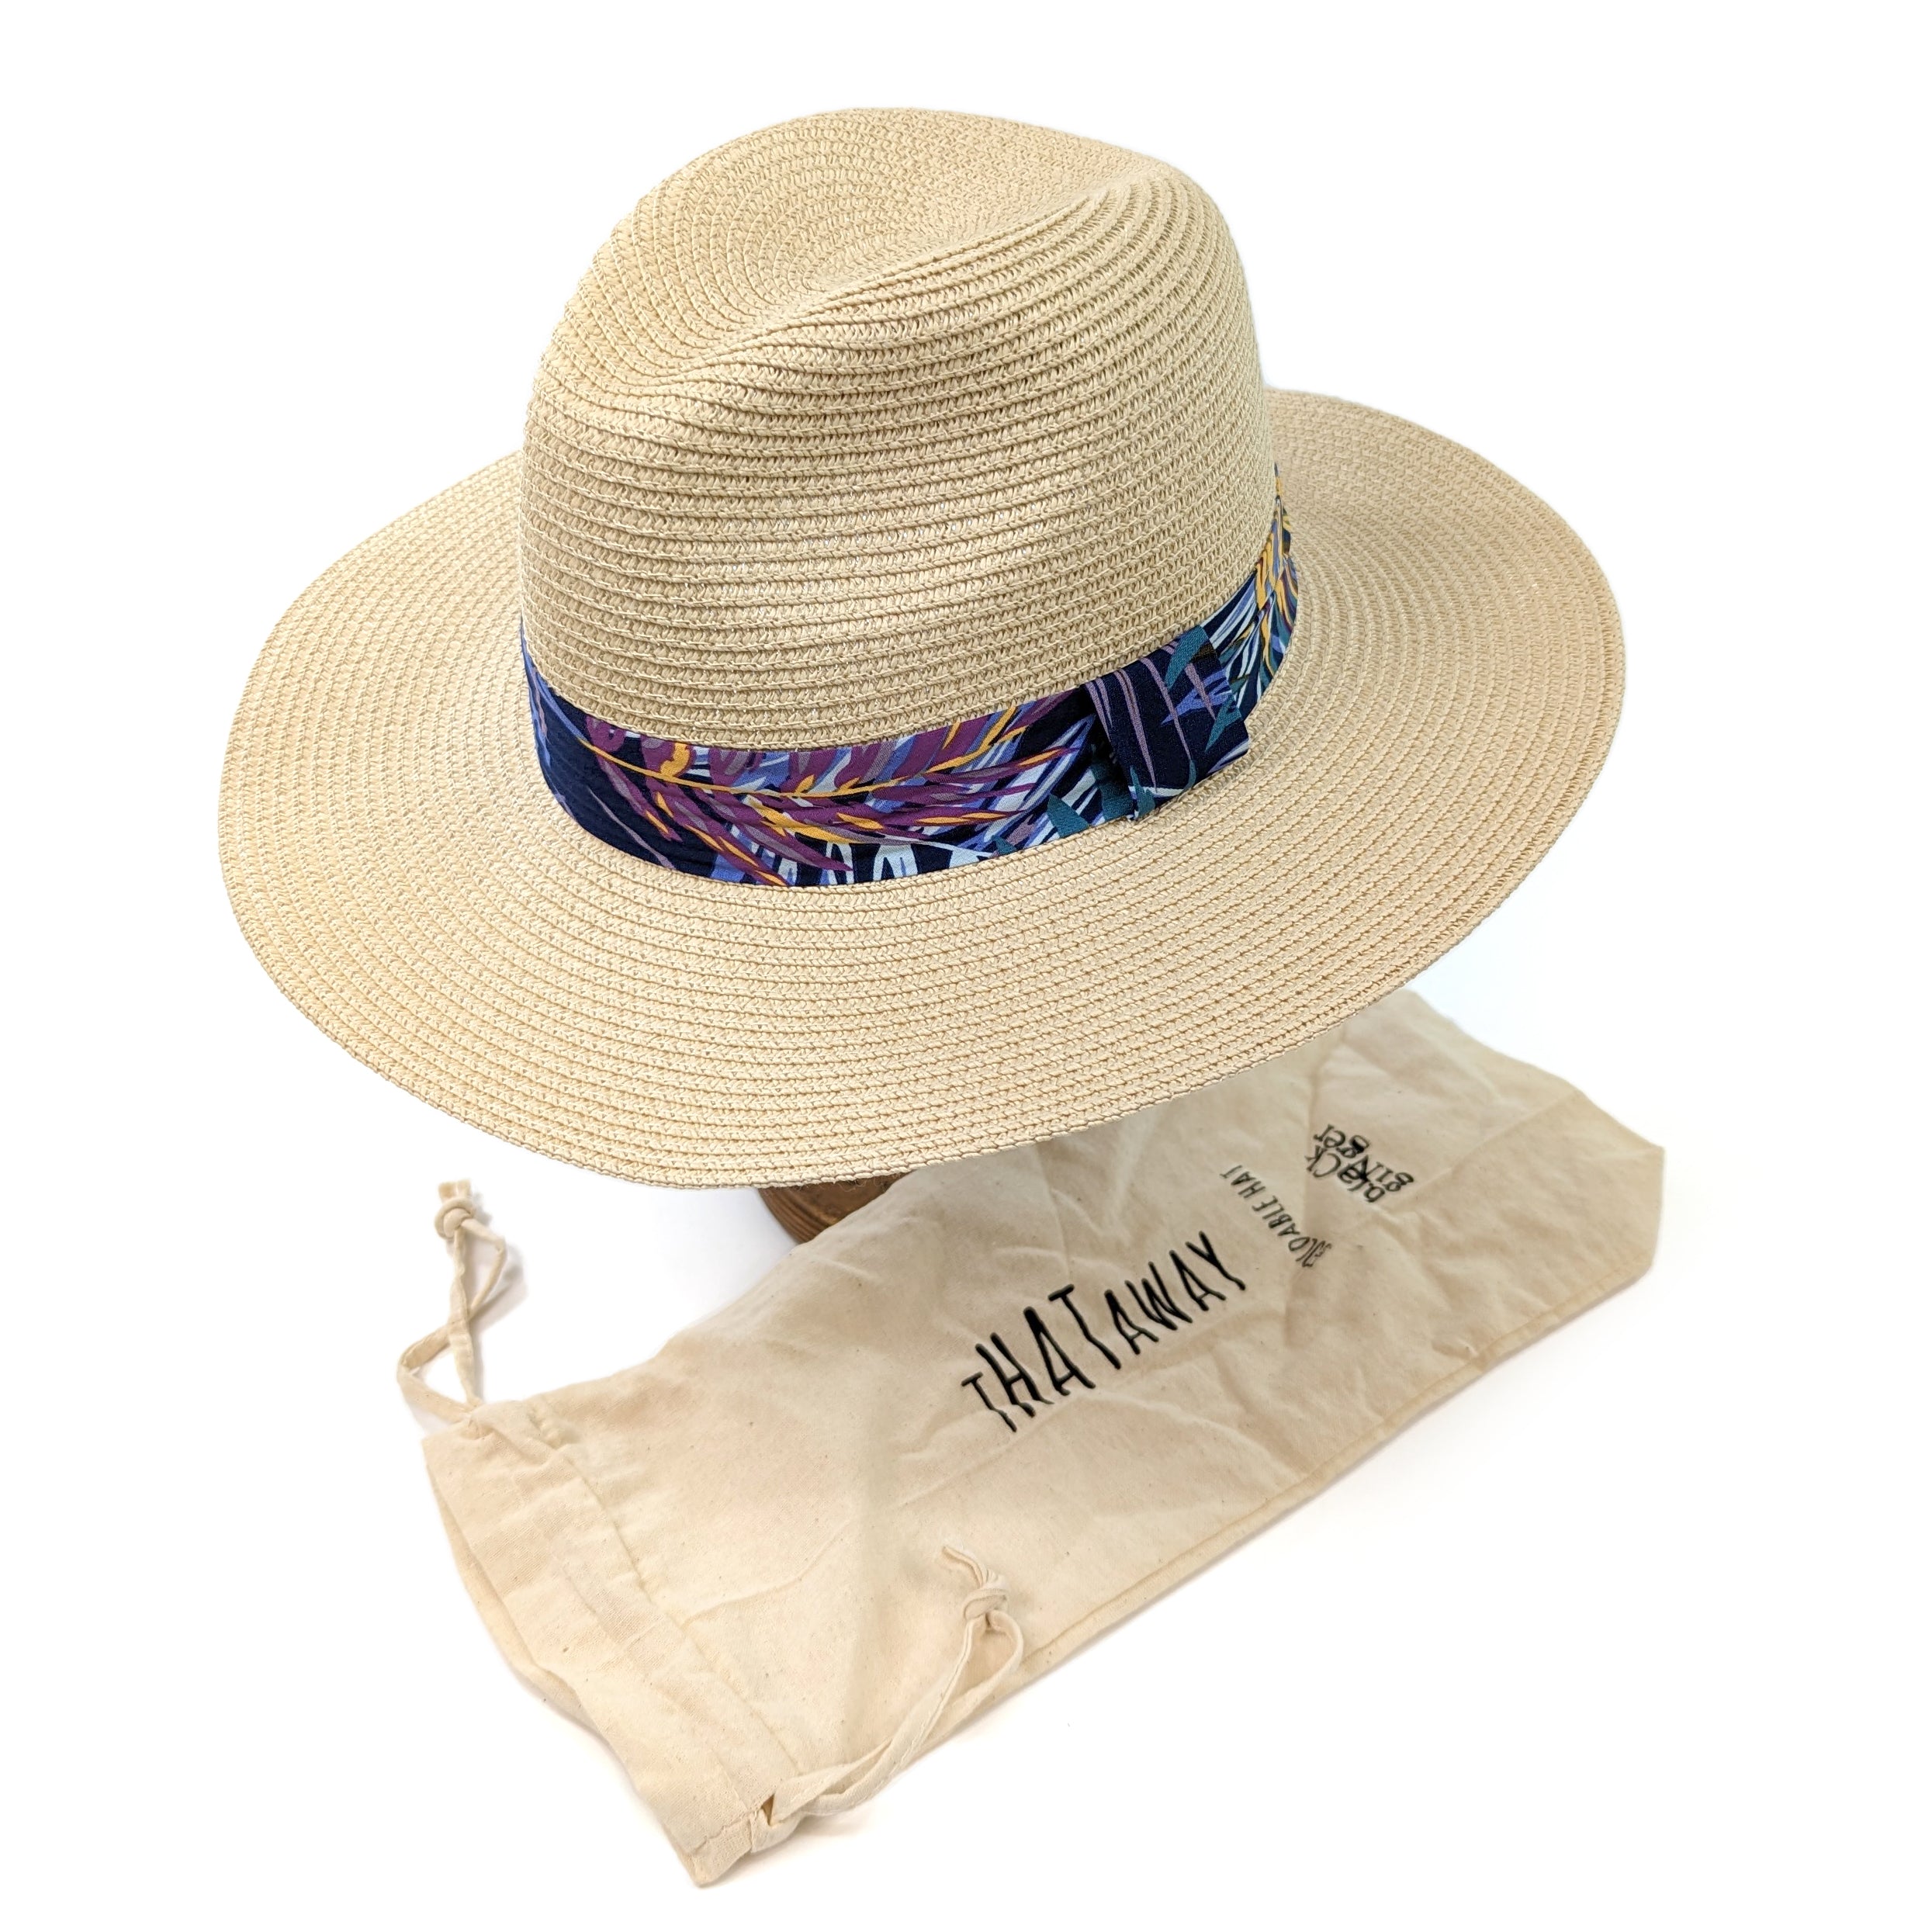 A traditional panama style hat made from 100% paper. tropical ribbon band. it is the perfect travel hack as it comes with a  pouch. Great UPF 50 sun protection